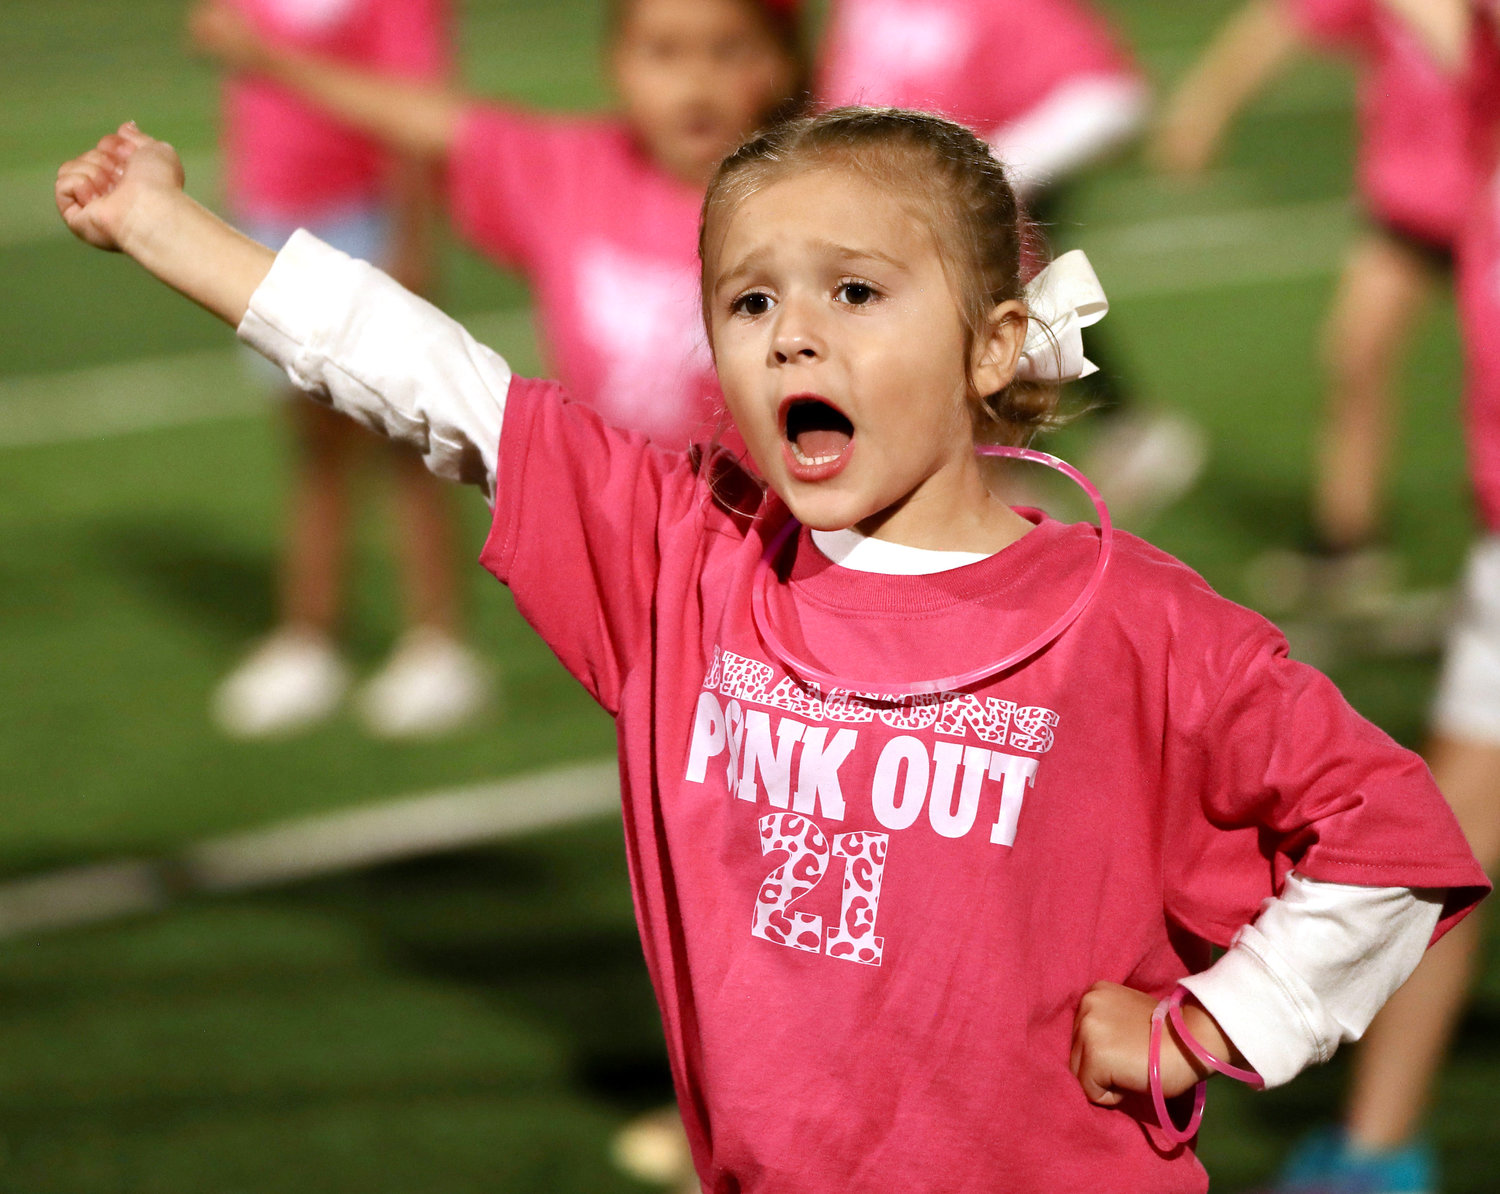 Mikiah McAnally cheers at halftime of Thursday night’s Purcell football game during the Dragon cheer camp routine.